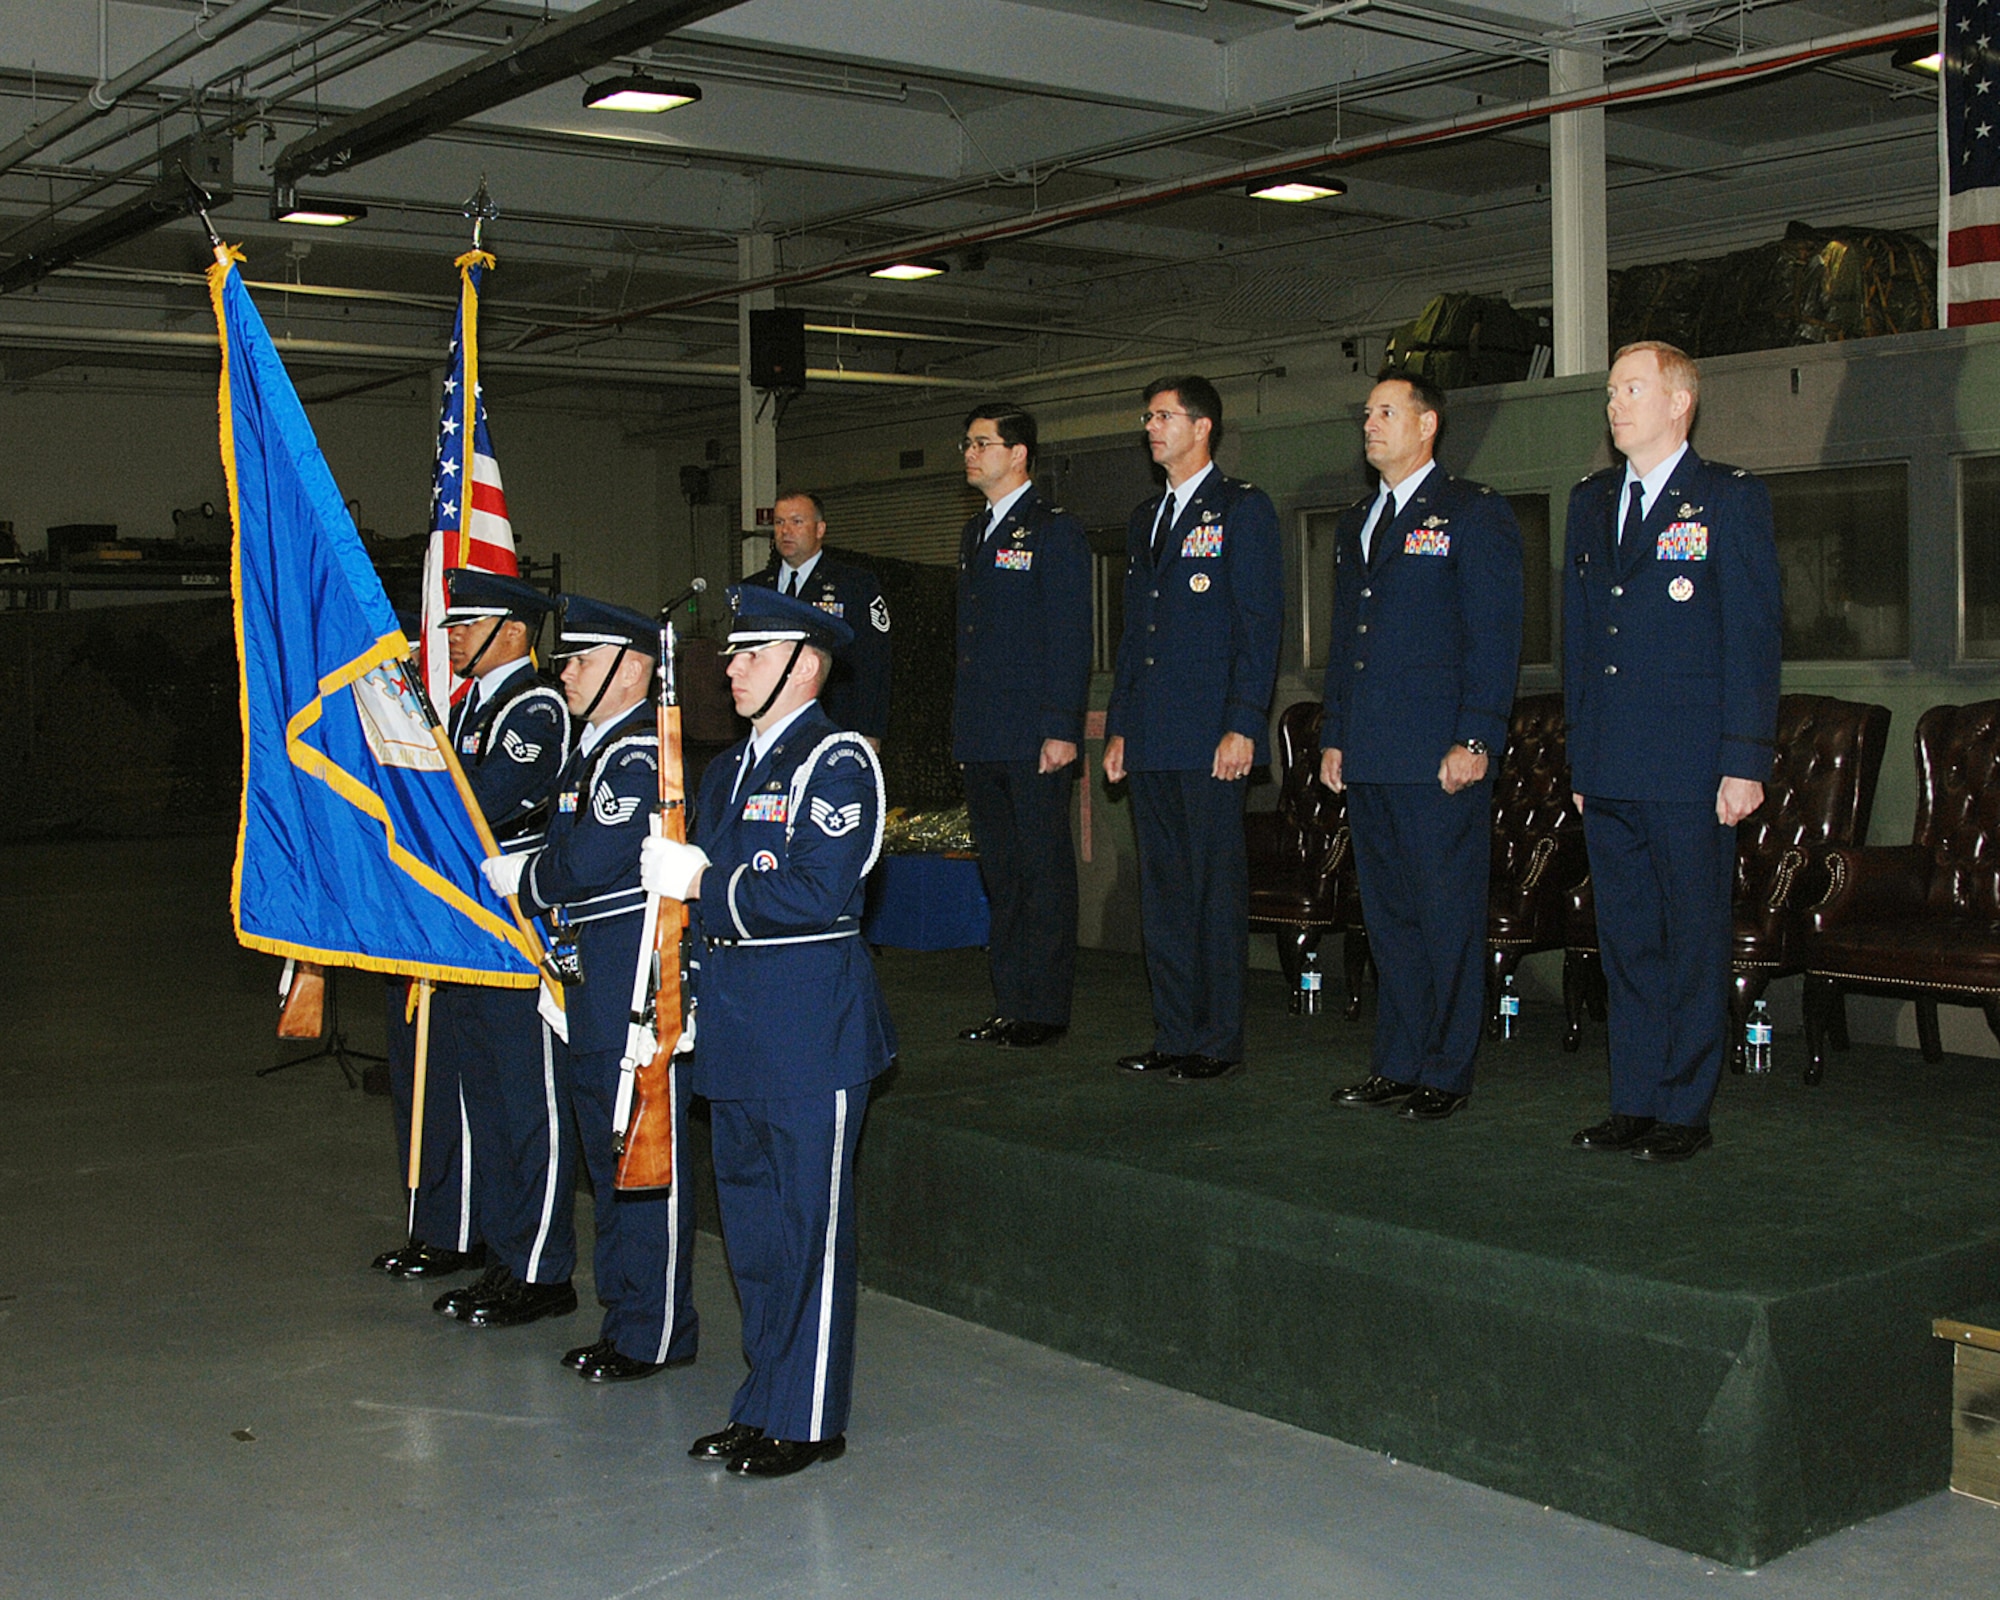 Travis Air Force Base Honor Guard presents the flag during the 615th Contingency Operational Support Group wing stand up.